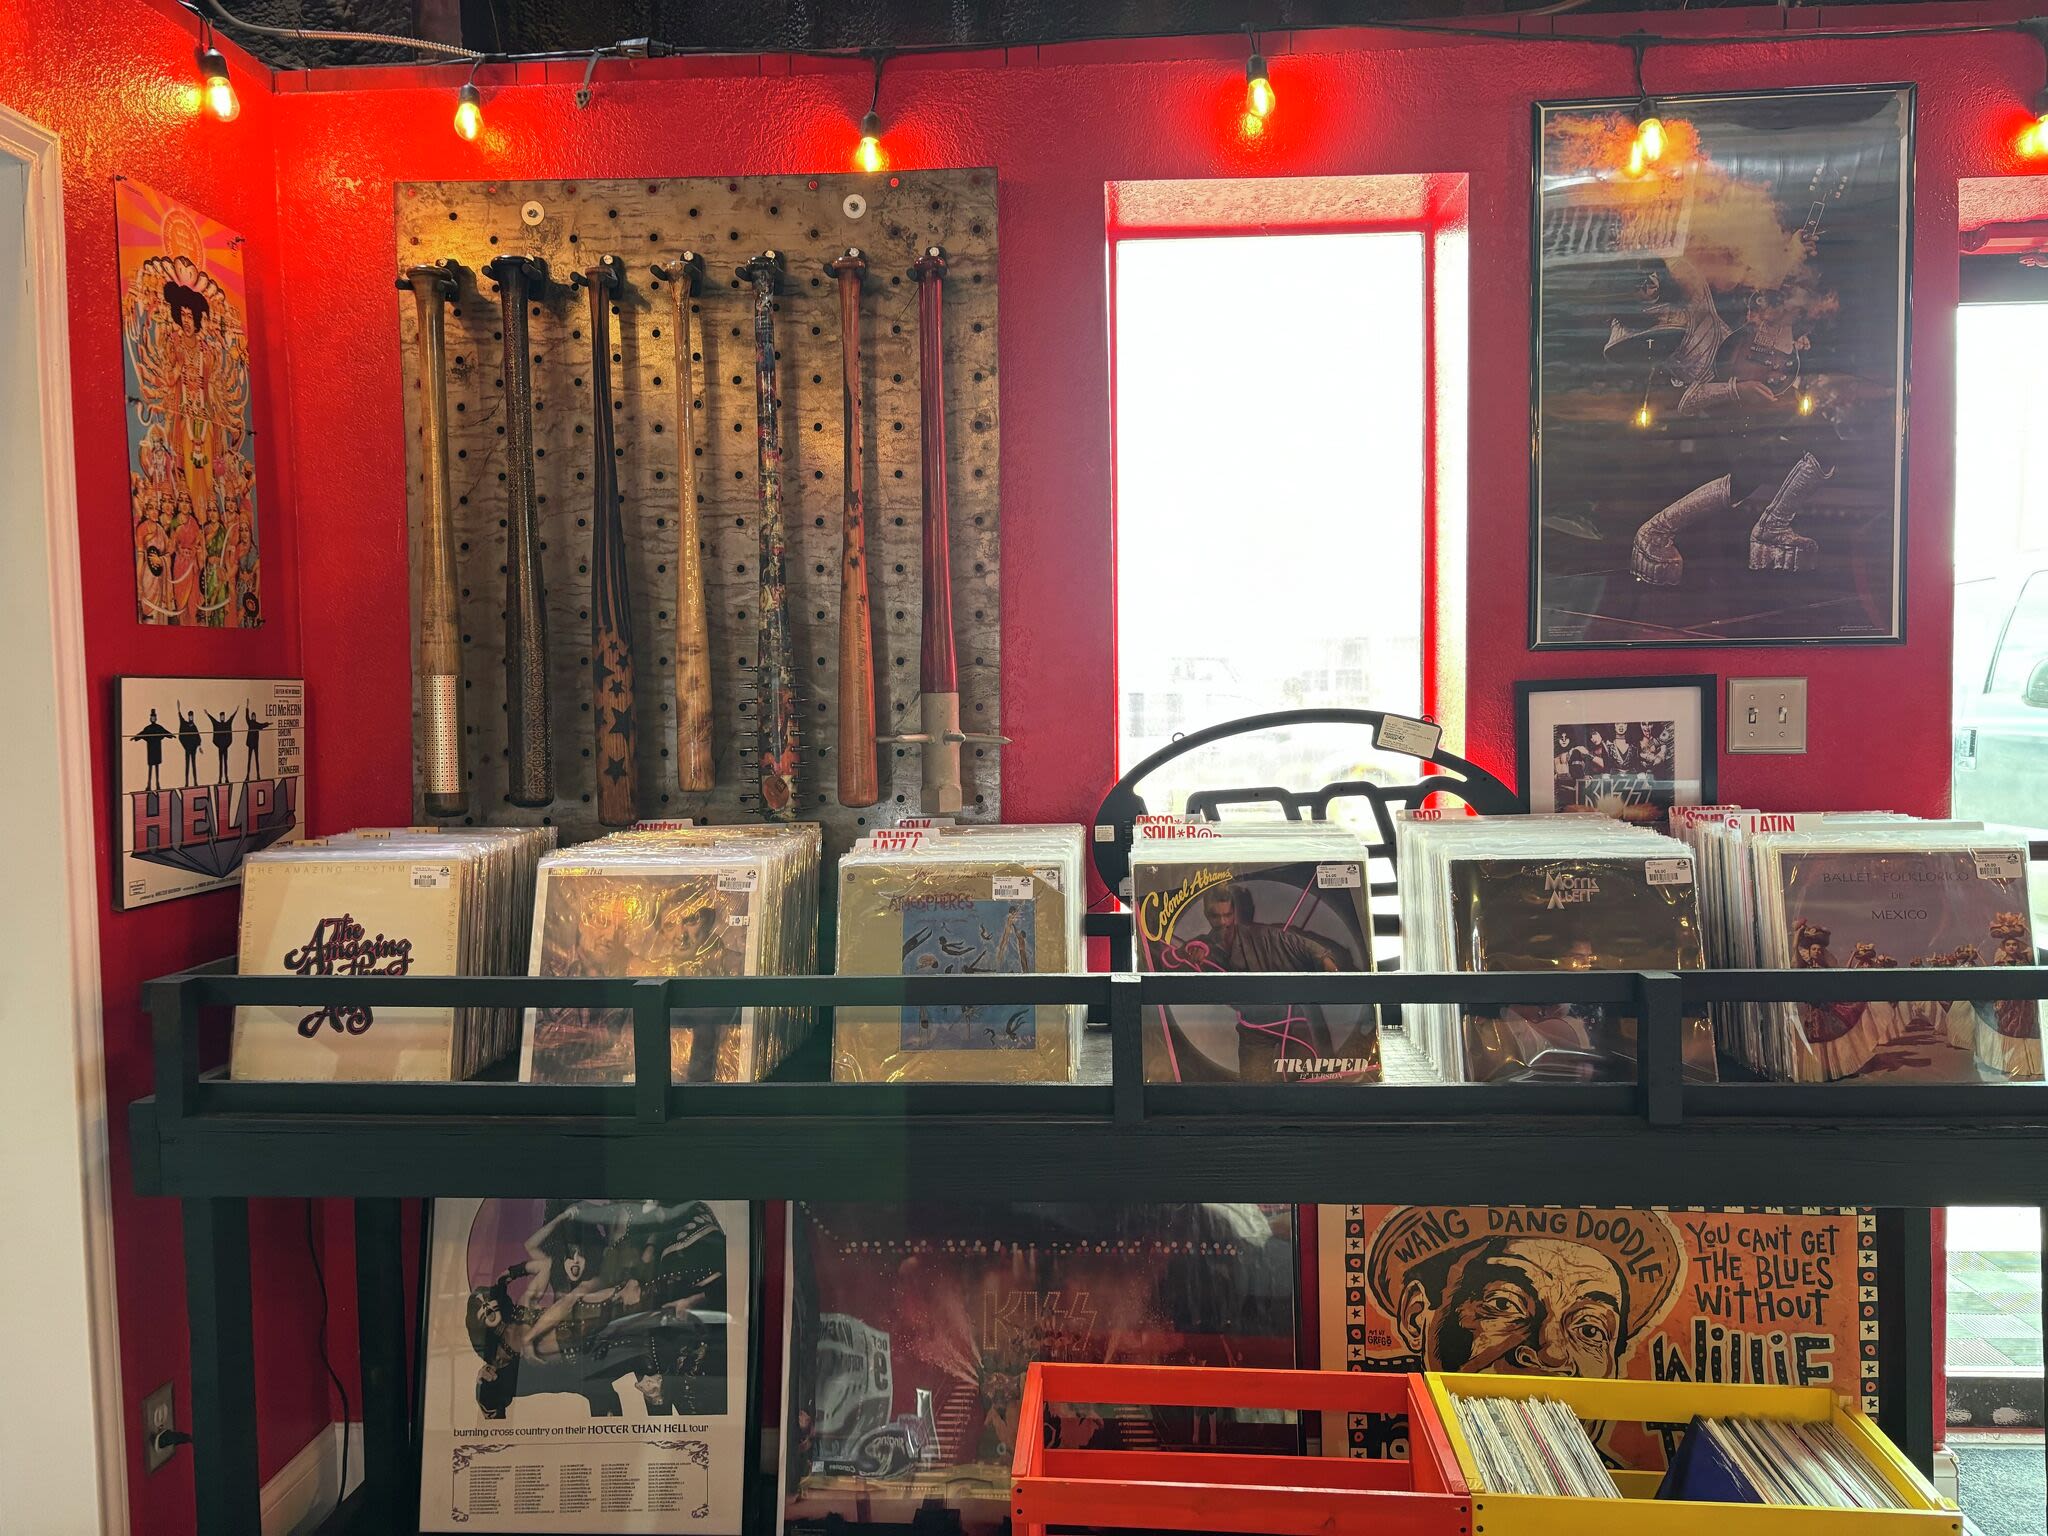 New vinyl record store coming to Midland